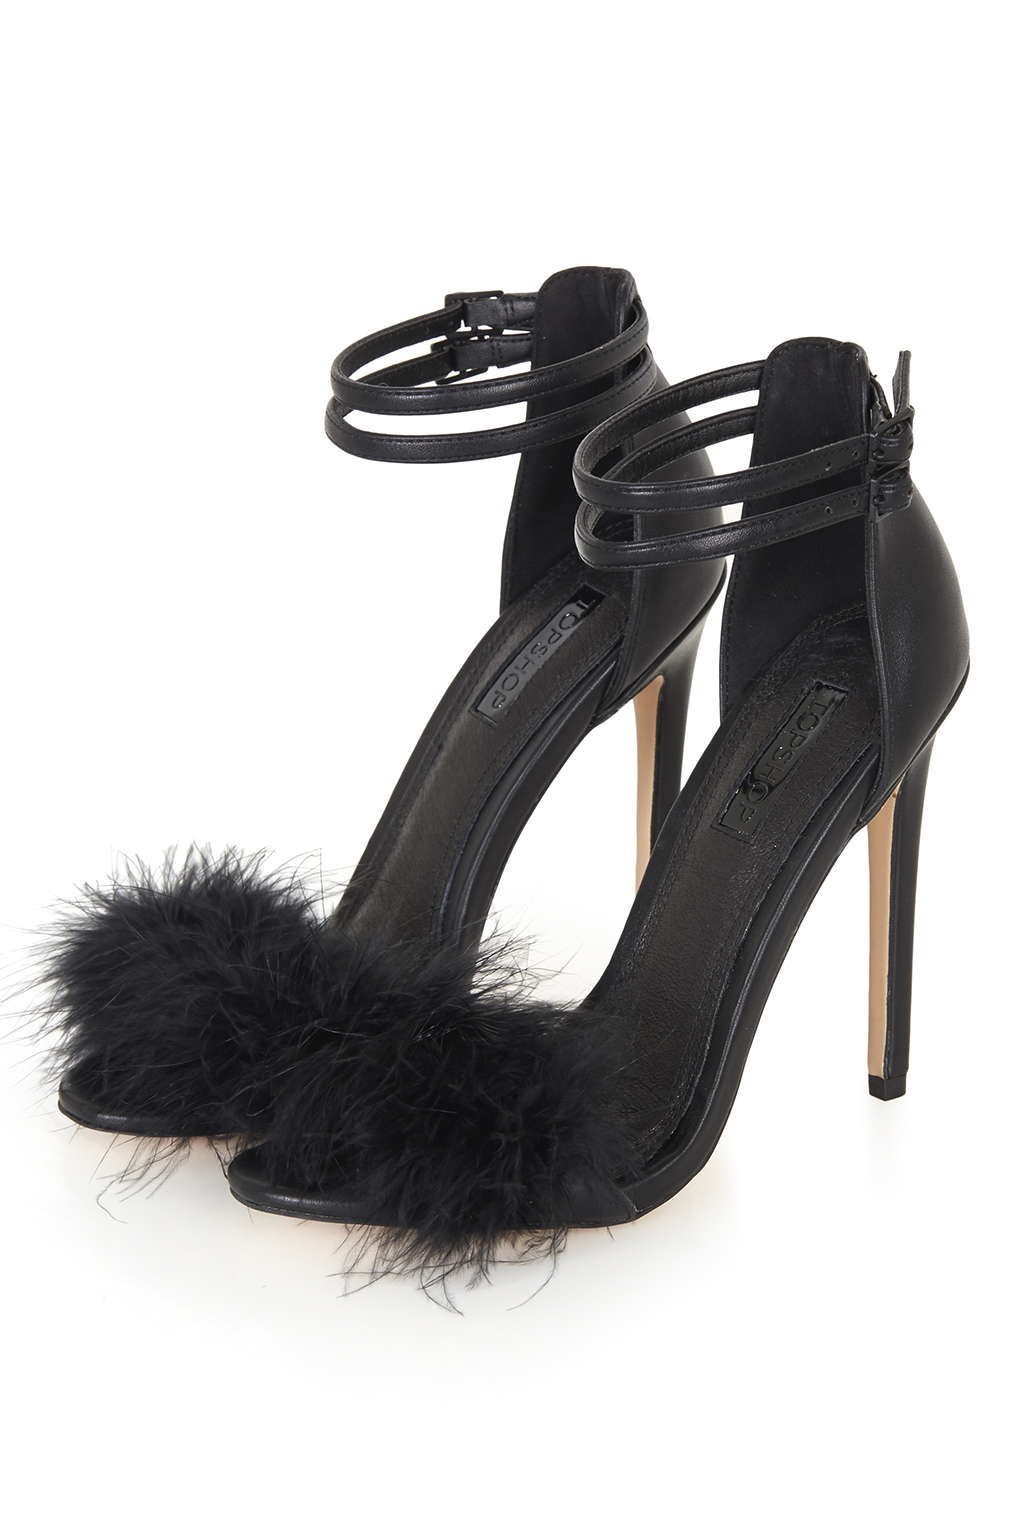 Lyst - Topshop Reese Feather Sandals in Black